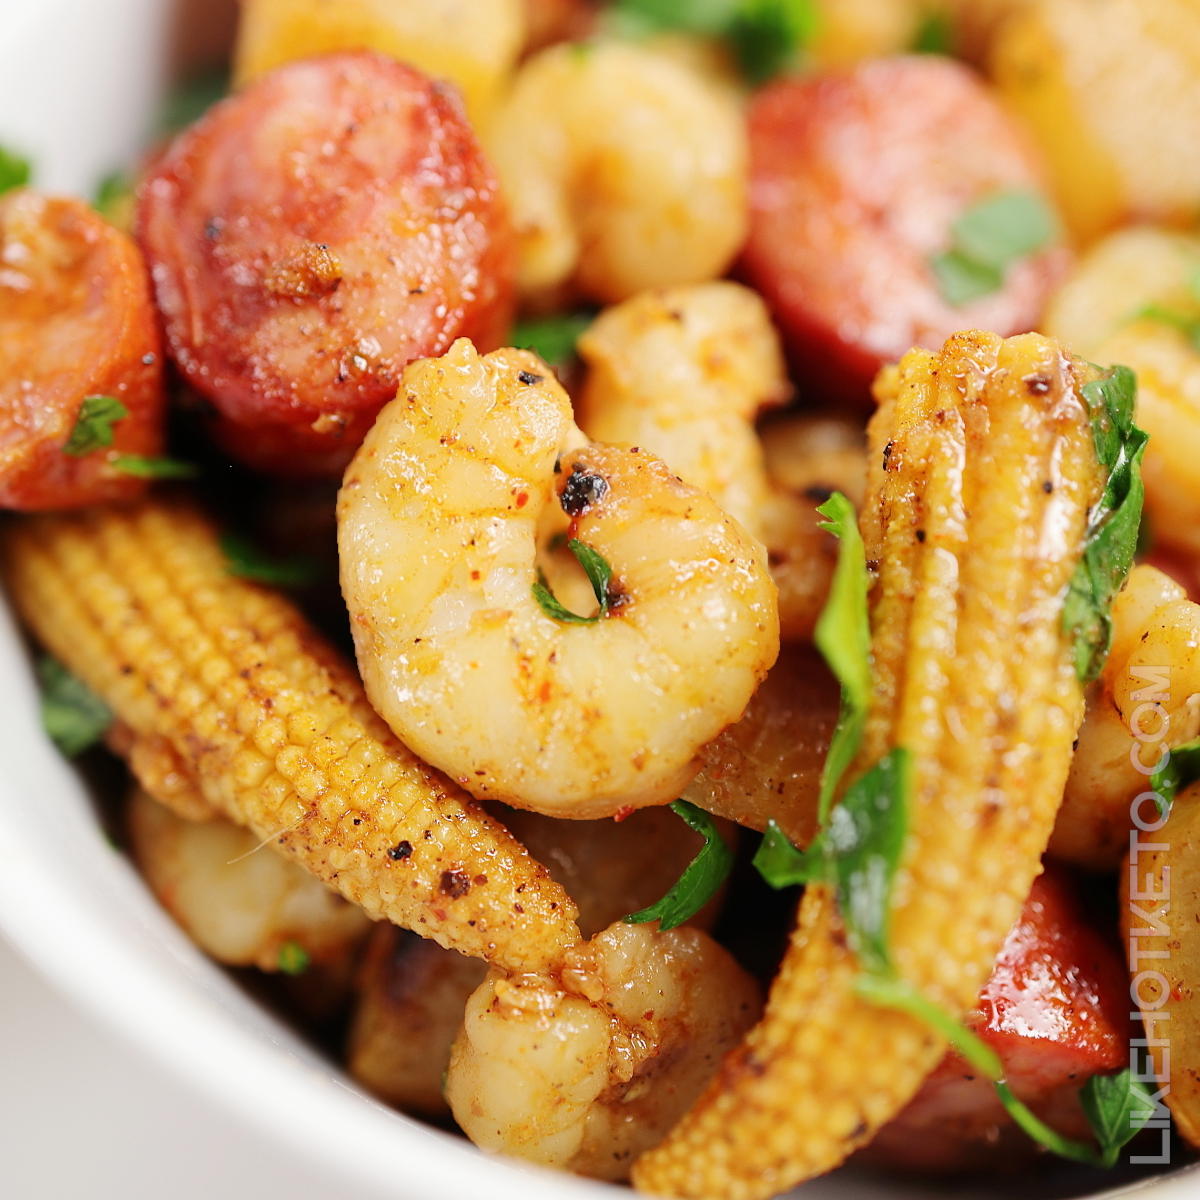 Shrimp boil with andouille sausages, turnips and baby corn garnished with chopped parsley.